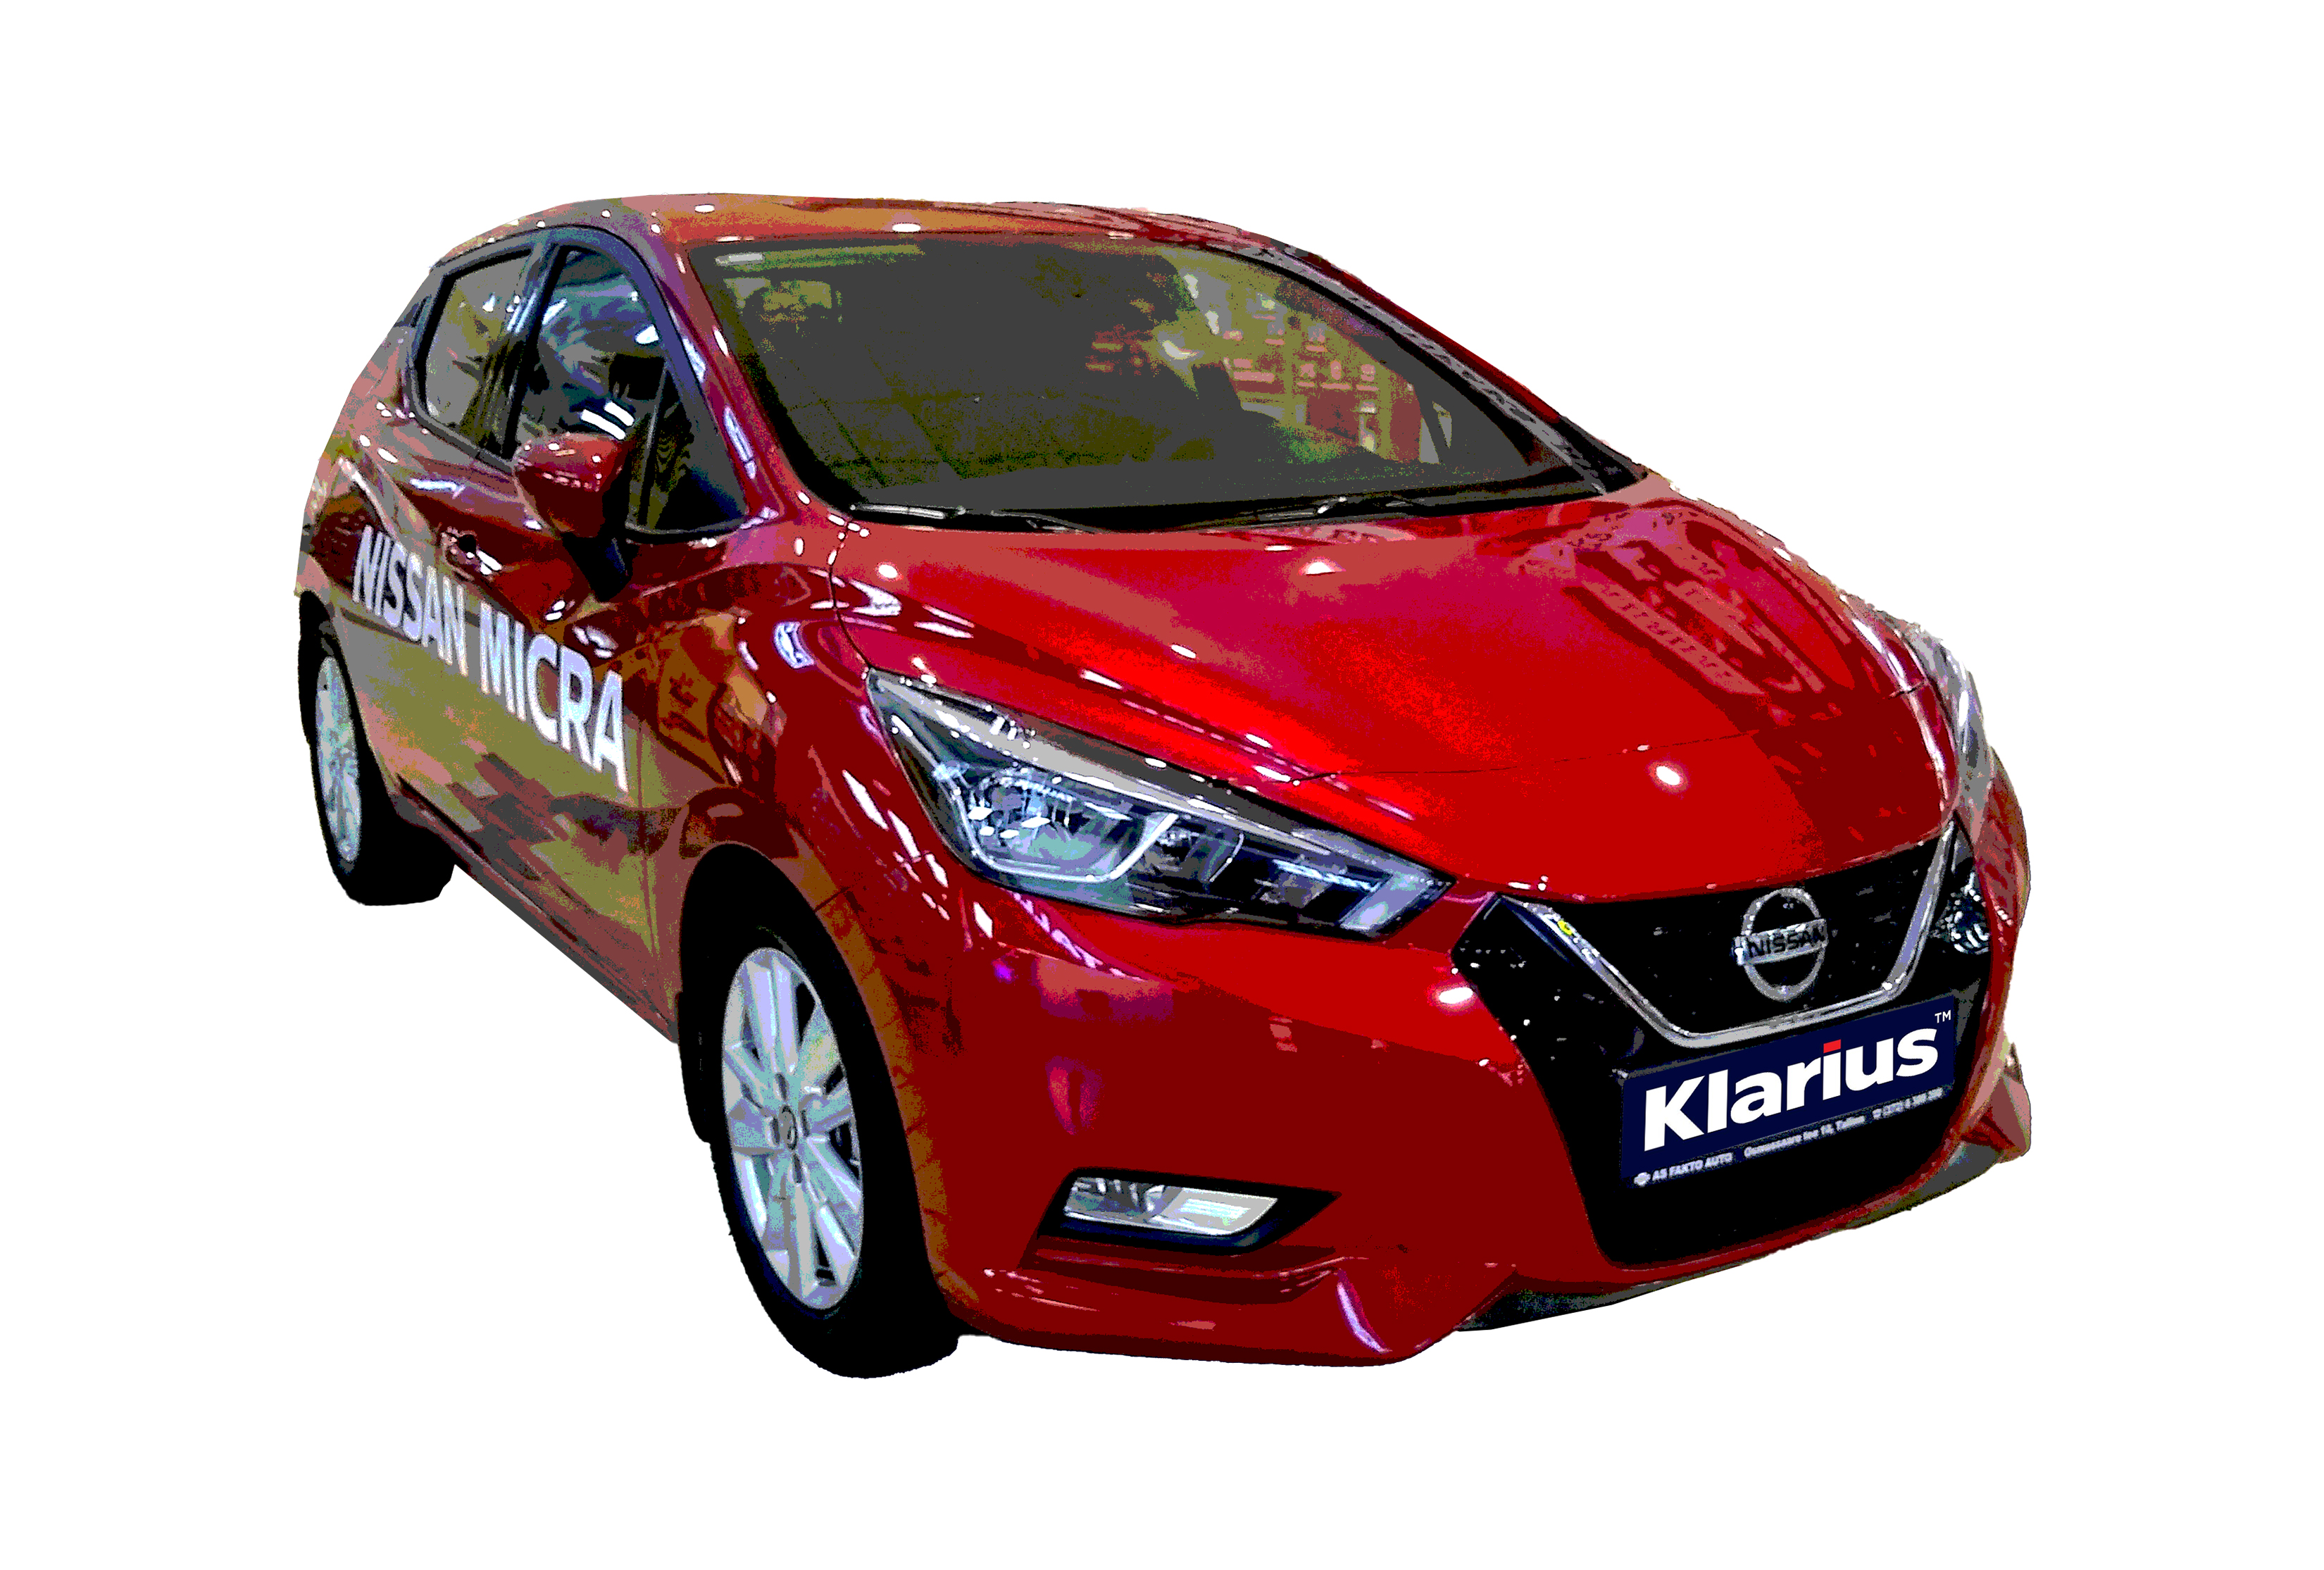 Klarius release a new range of aftermarket car parts, now offering support for the 2016-2019 Nissan Micra.